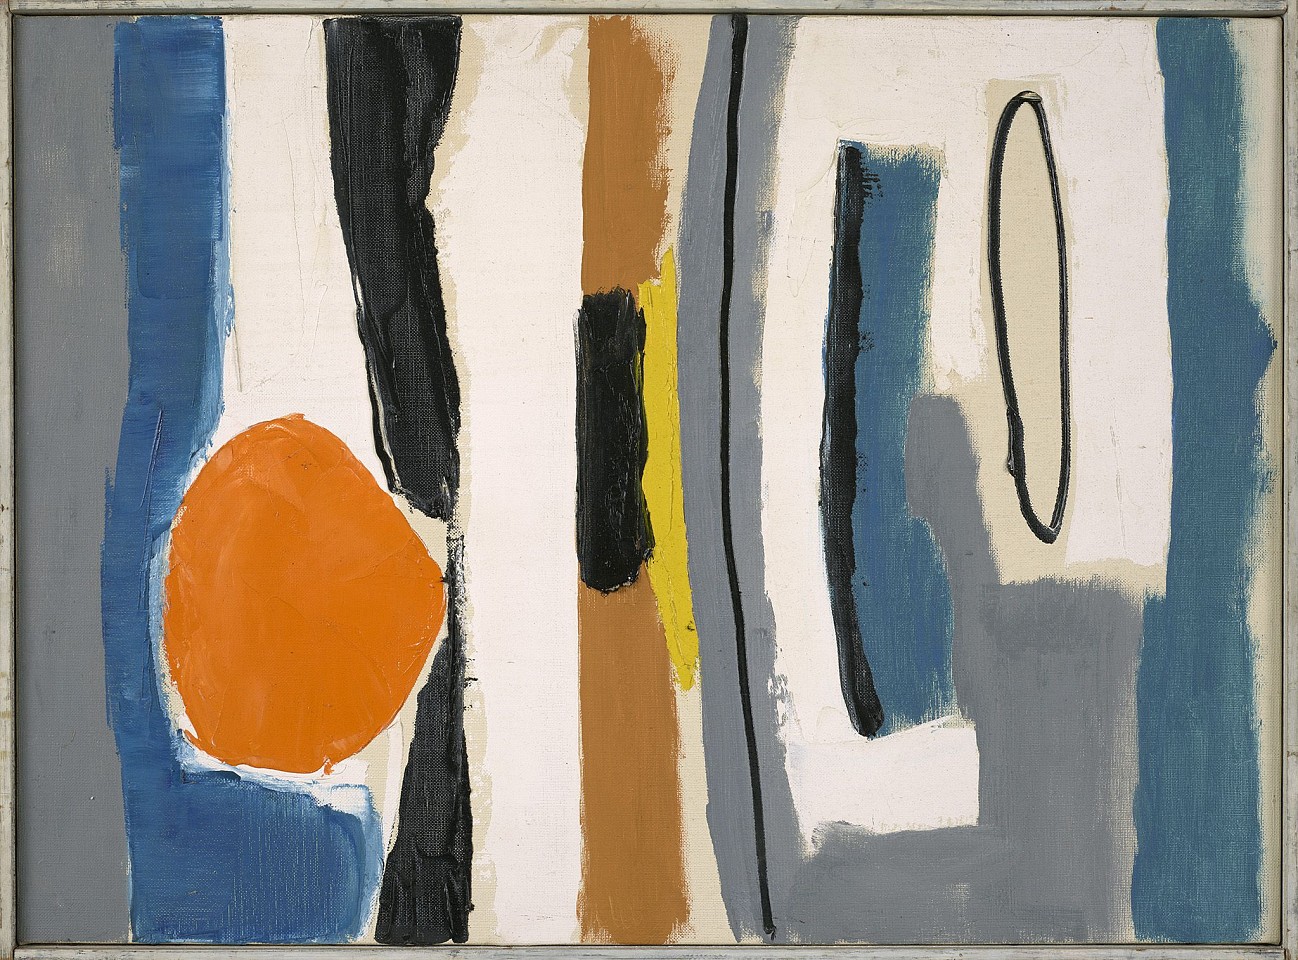 Edward Zutrau, Abstraction (October) | SOLD, 1958
Oil on linen, 21 1/8 x 28 1/2 in. (53.7 x 72.4 cm)
ZUT-00071